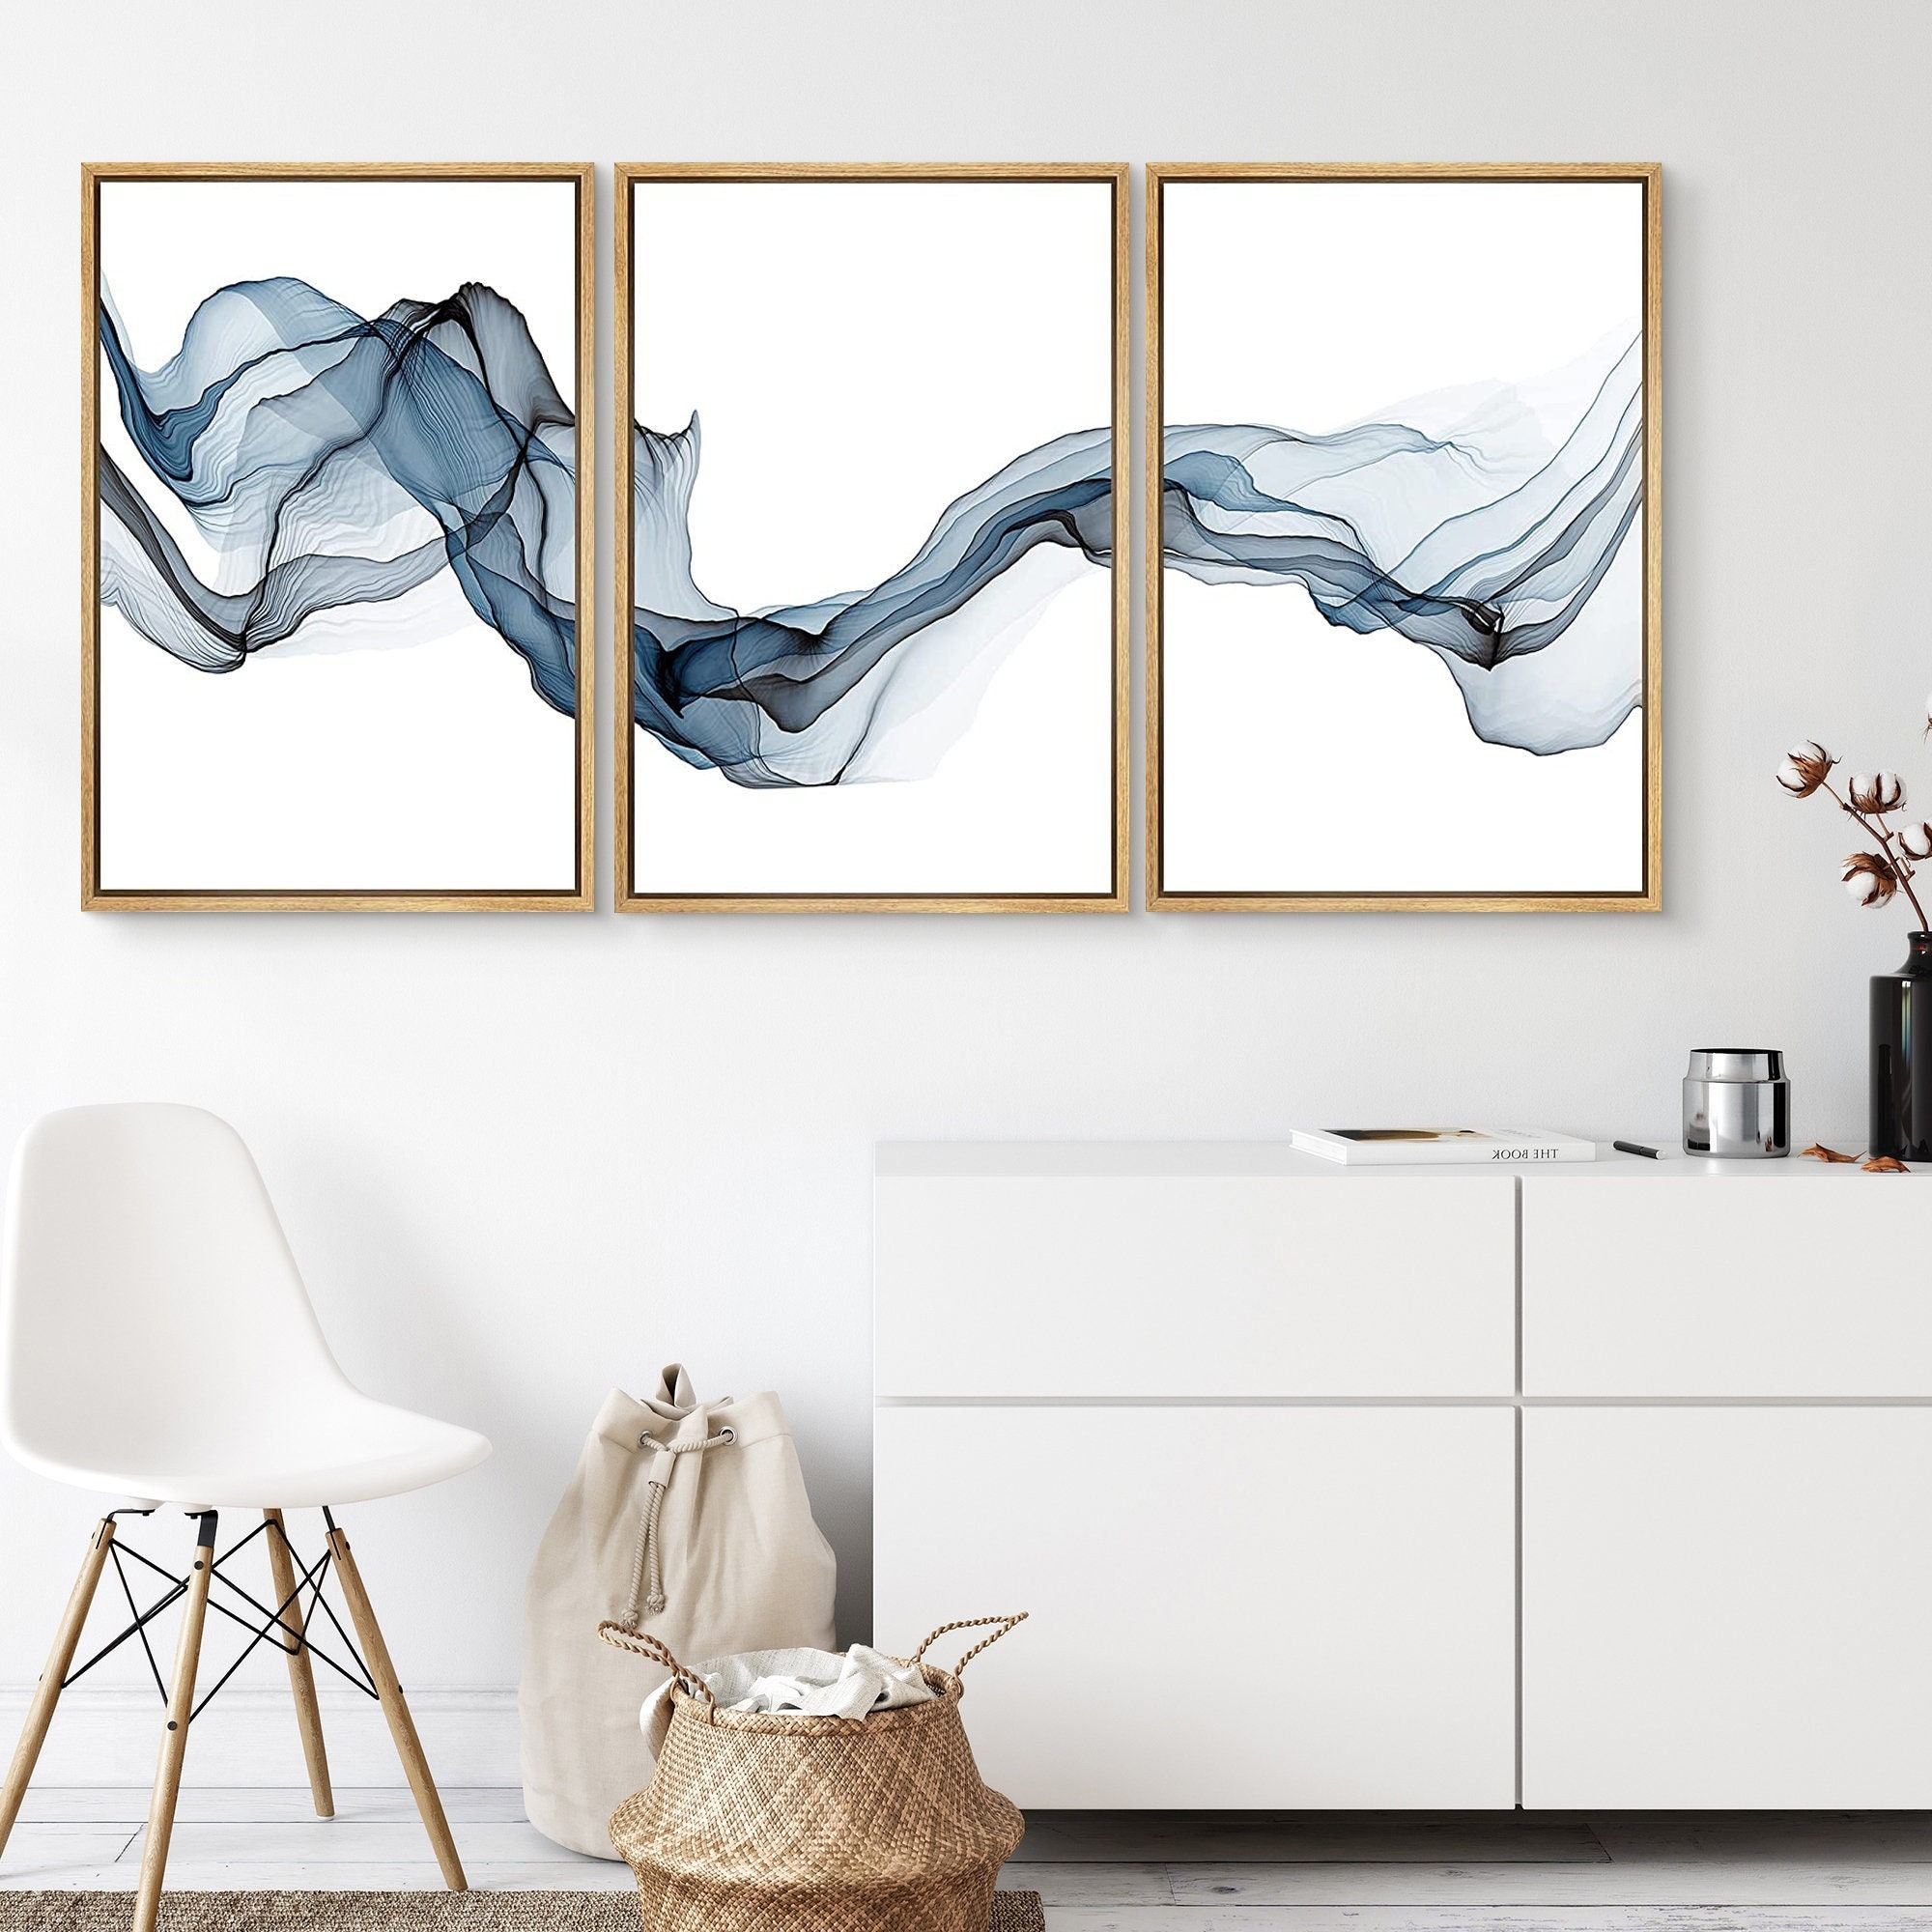 Looife Abstract Canvas Wall Art 3 Pieces 30x40 Inch Light Blue and White  Painting Creative Picture Prints Canvas Wall Decor Ready to Hang